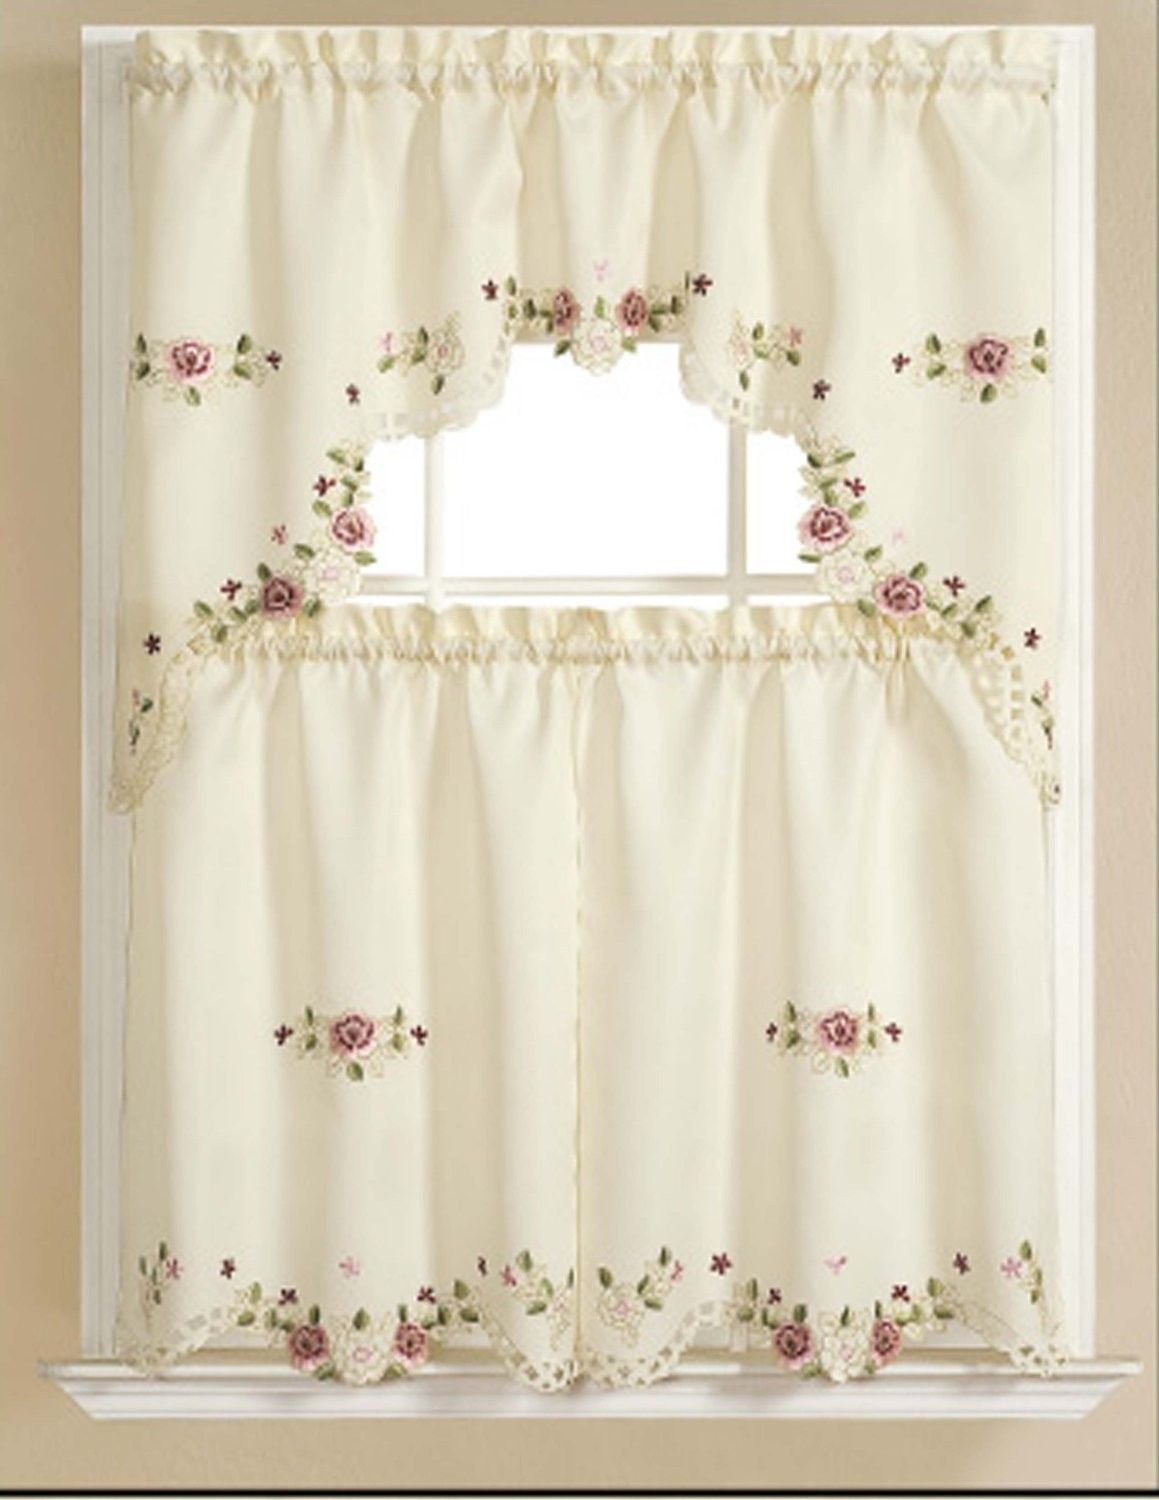 Alisha Elegant Embroidered Kitchen Curtain Swag & Tiers Set Intended For Floral Embroidered Sheer Kitchen Curtain Tiers, Swags And Valances (View 6 of 20)